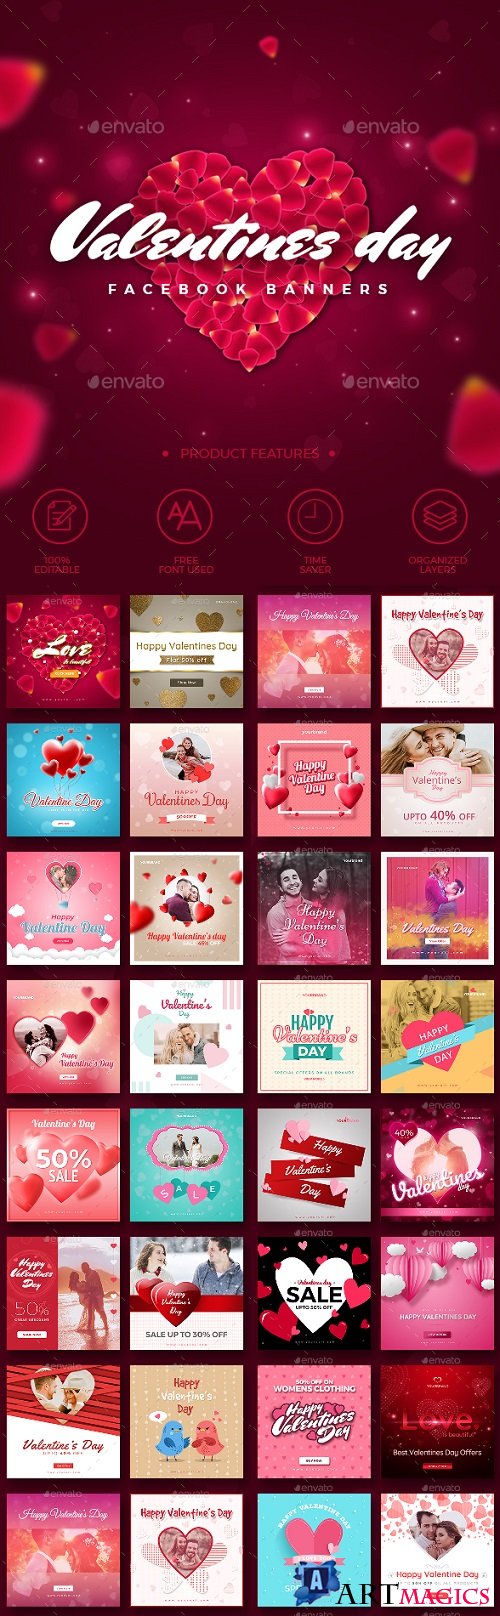 30 Valentines Day Instagram Promotion Banners 21276406